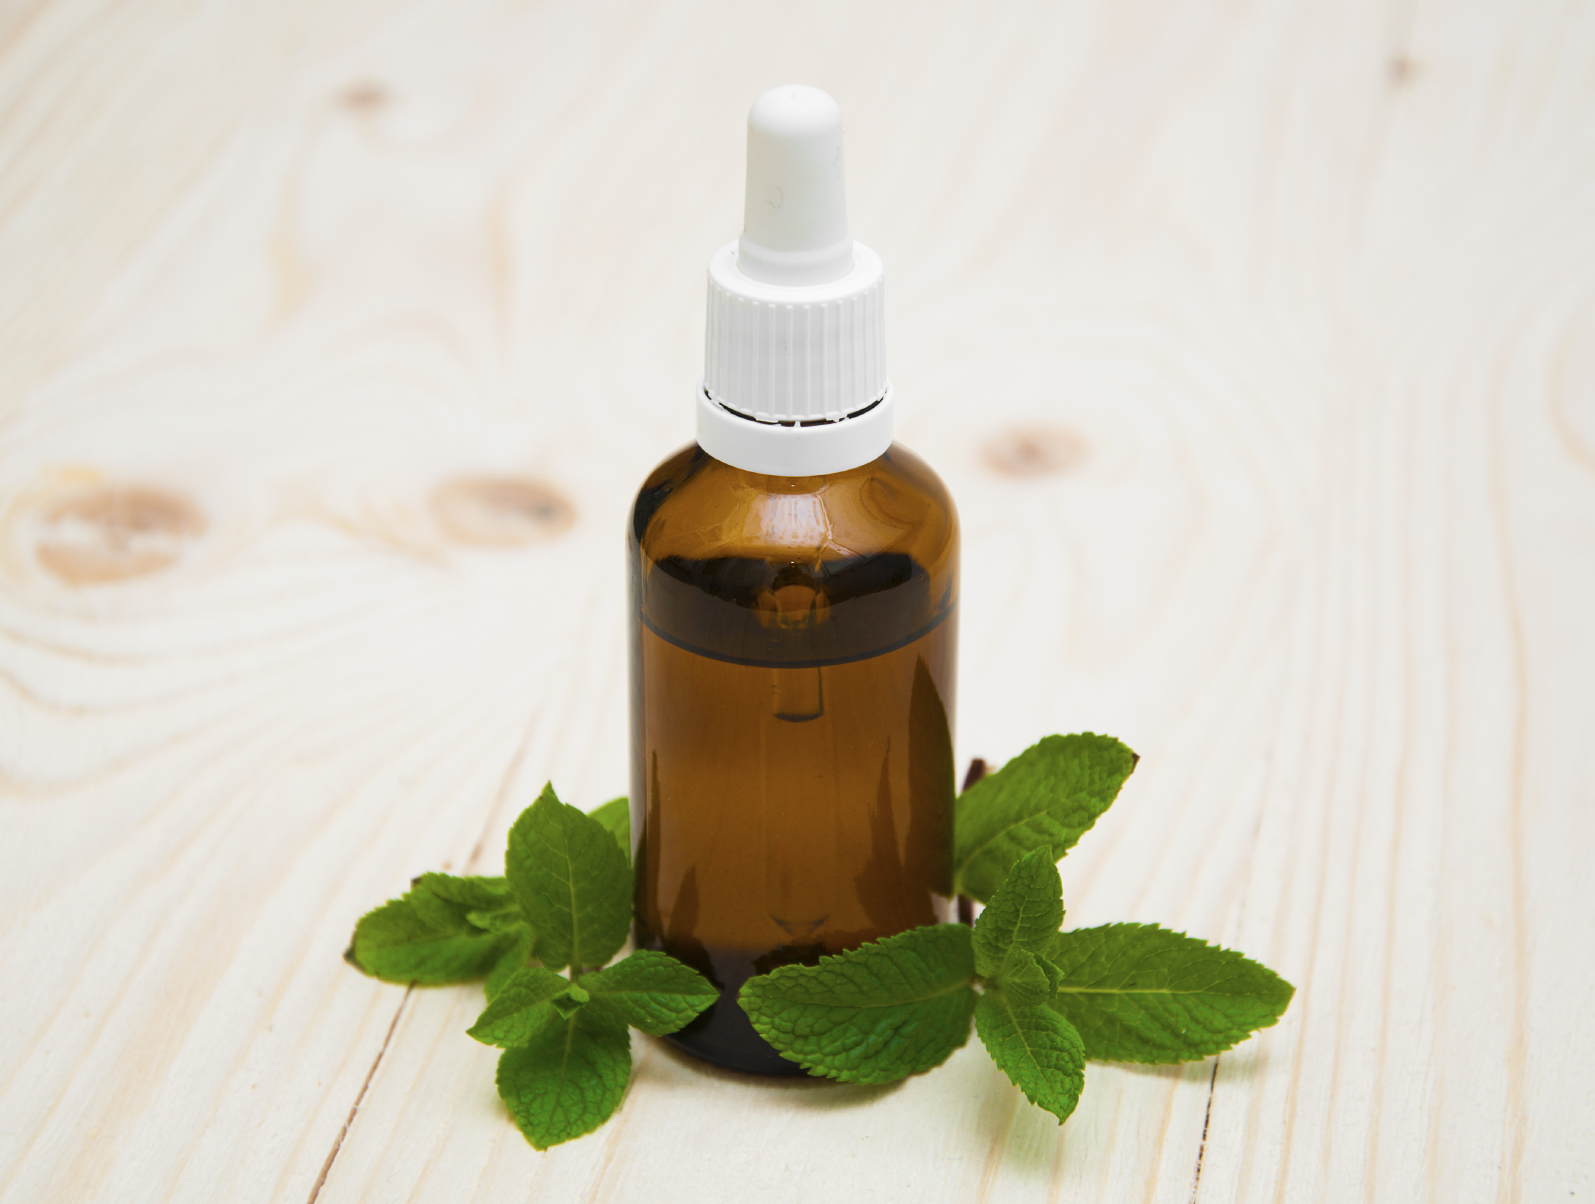 Research shows this essential oil may be the answer to relieving IBS pain once and for all.